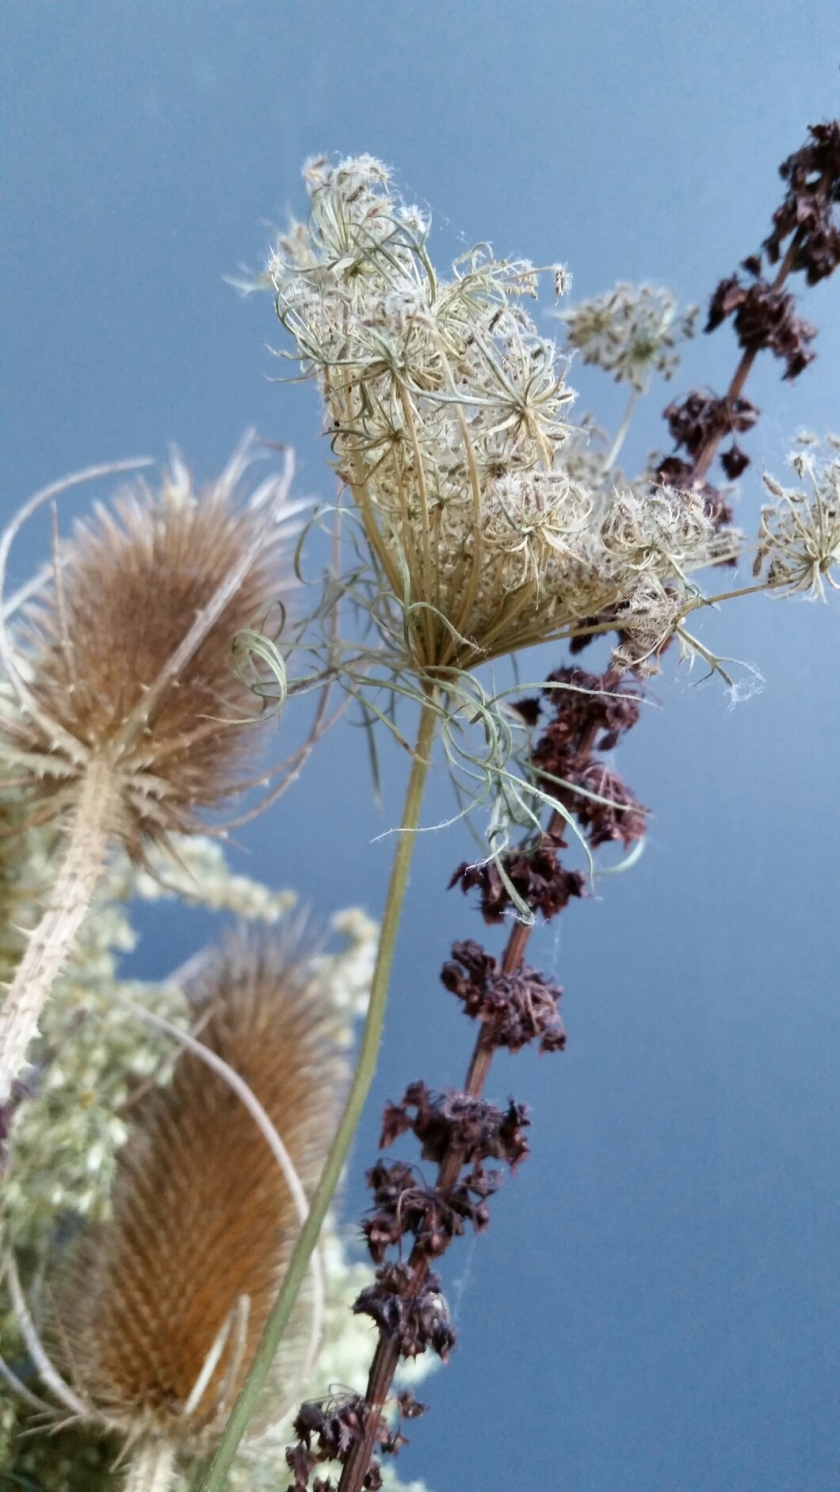 Dried flowers, Queen Anne lace, teasel